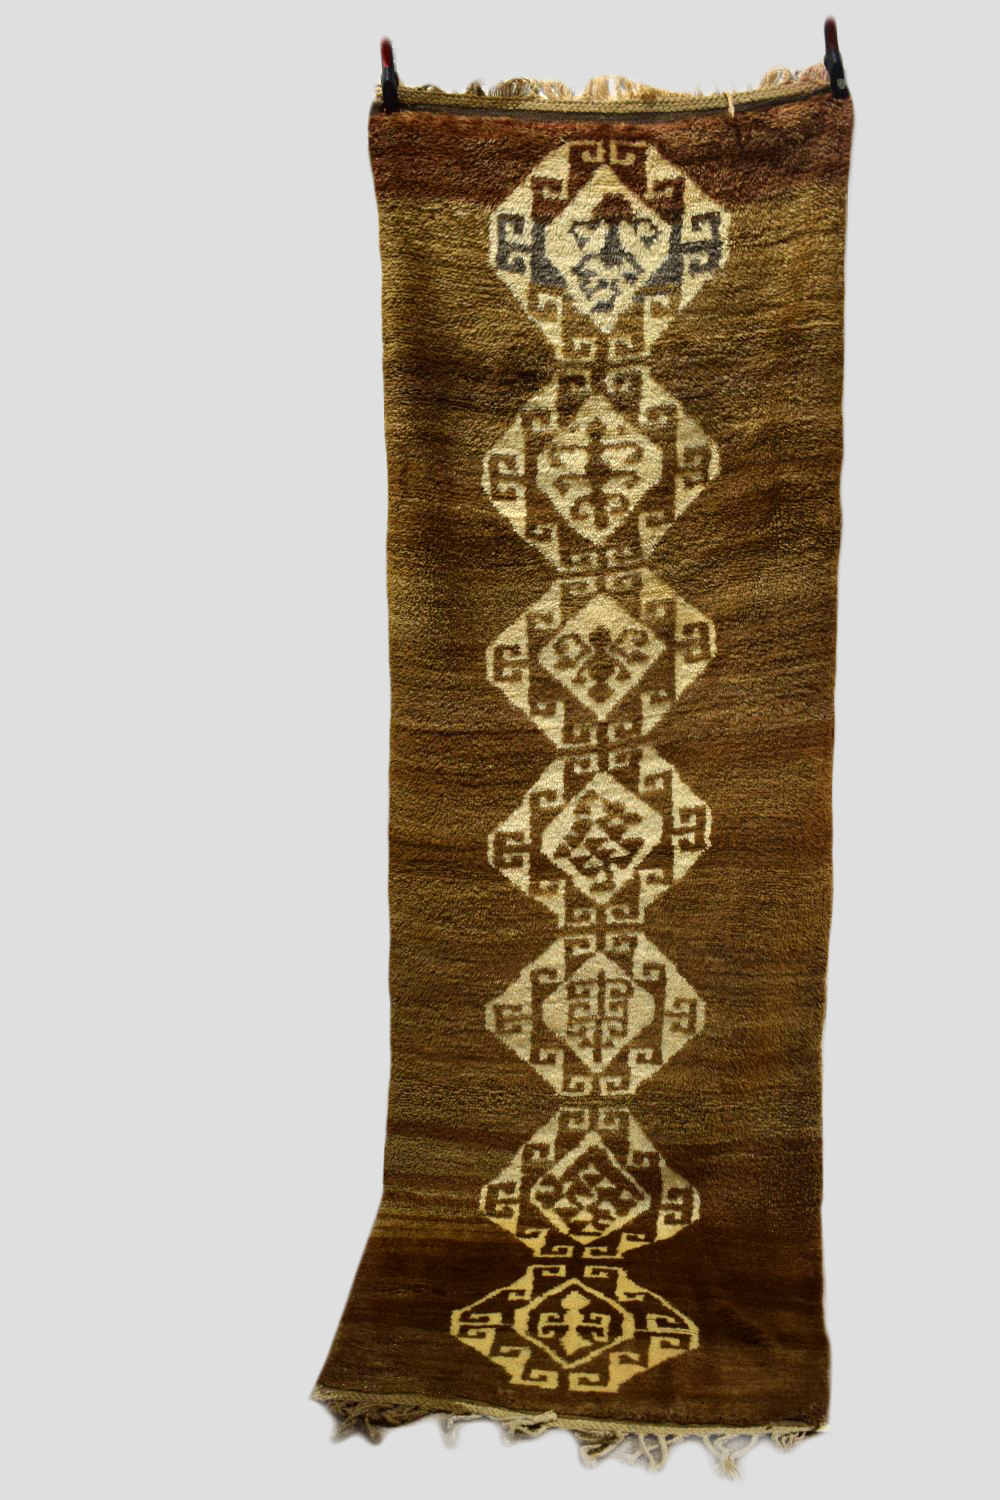 Anatolian tulu runner, 20th century, 10ft. 3in. x 3ft. 5in. 3.12m. x 1.04m. Pale walnut field with